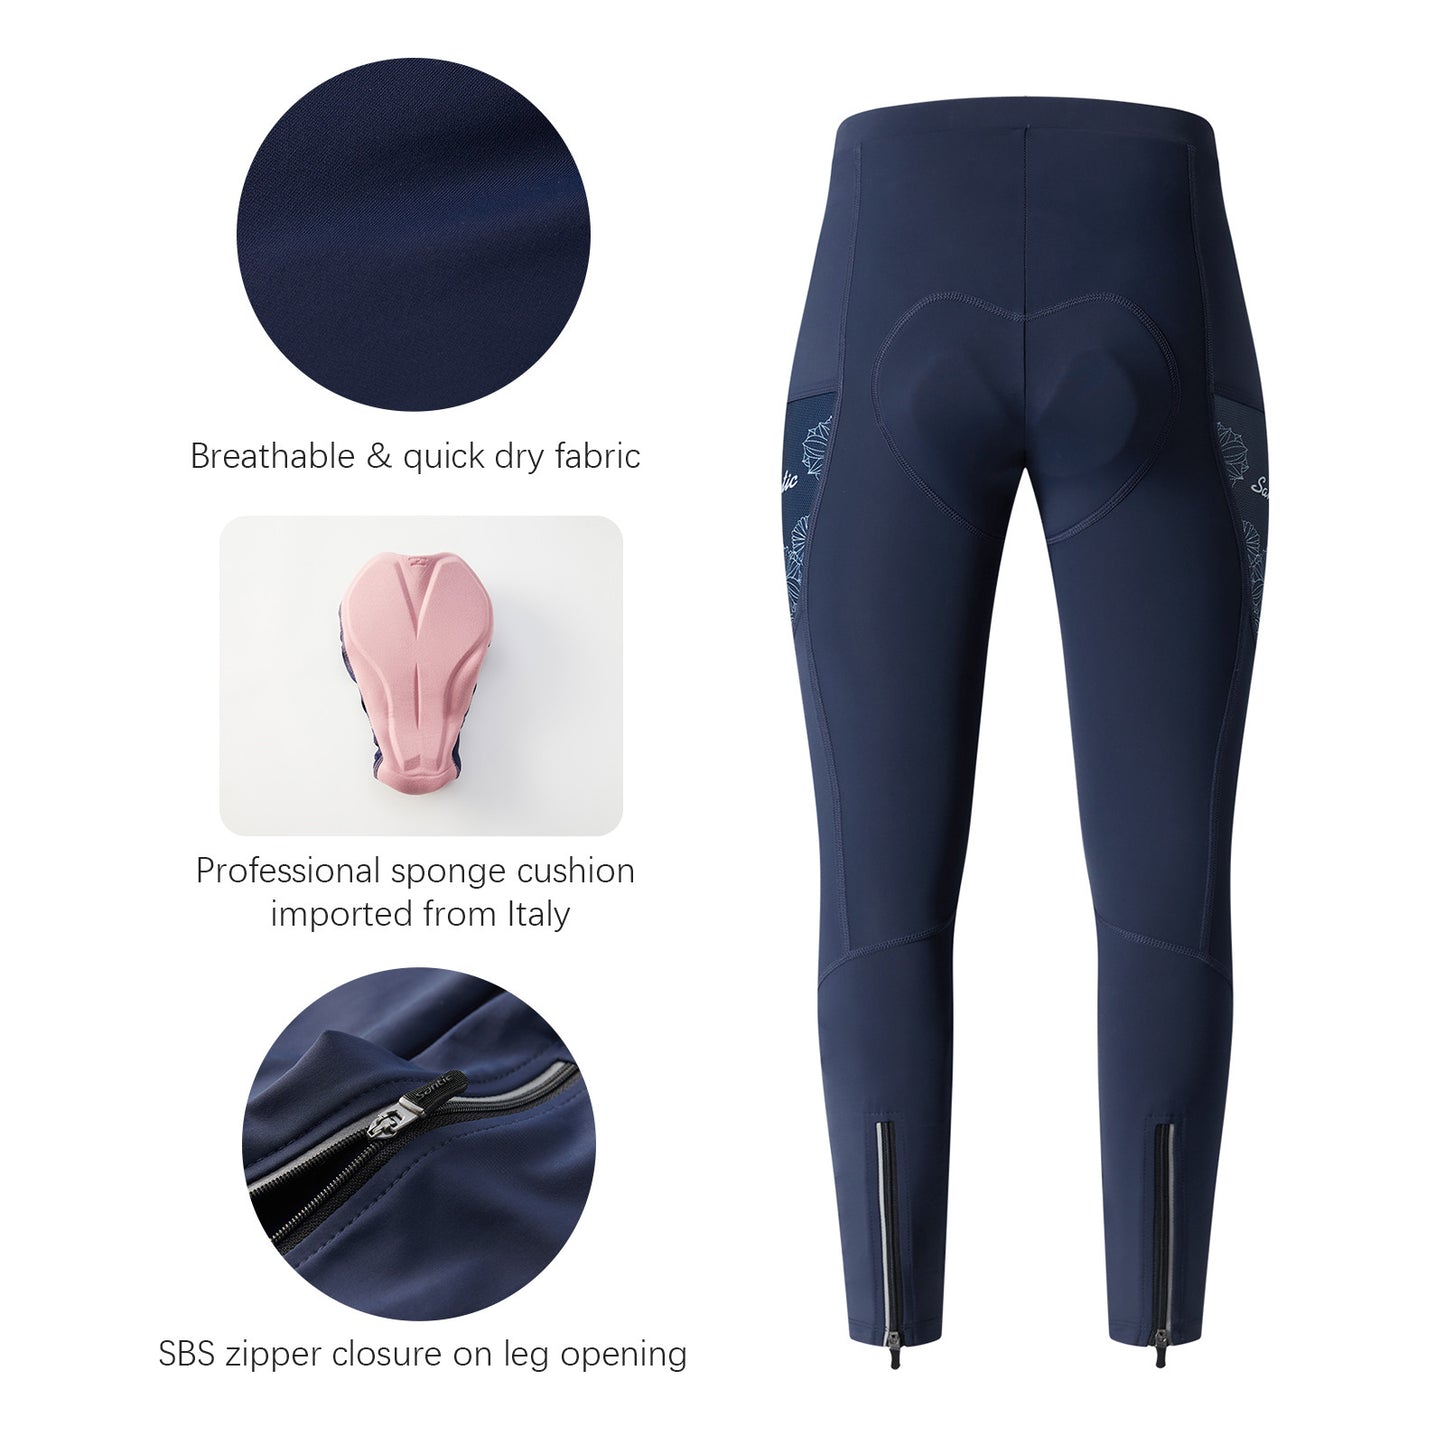 Santic Navy Women's Cycling Pants 4D Padded Bicycle Tights